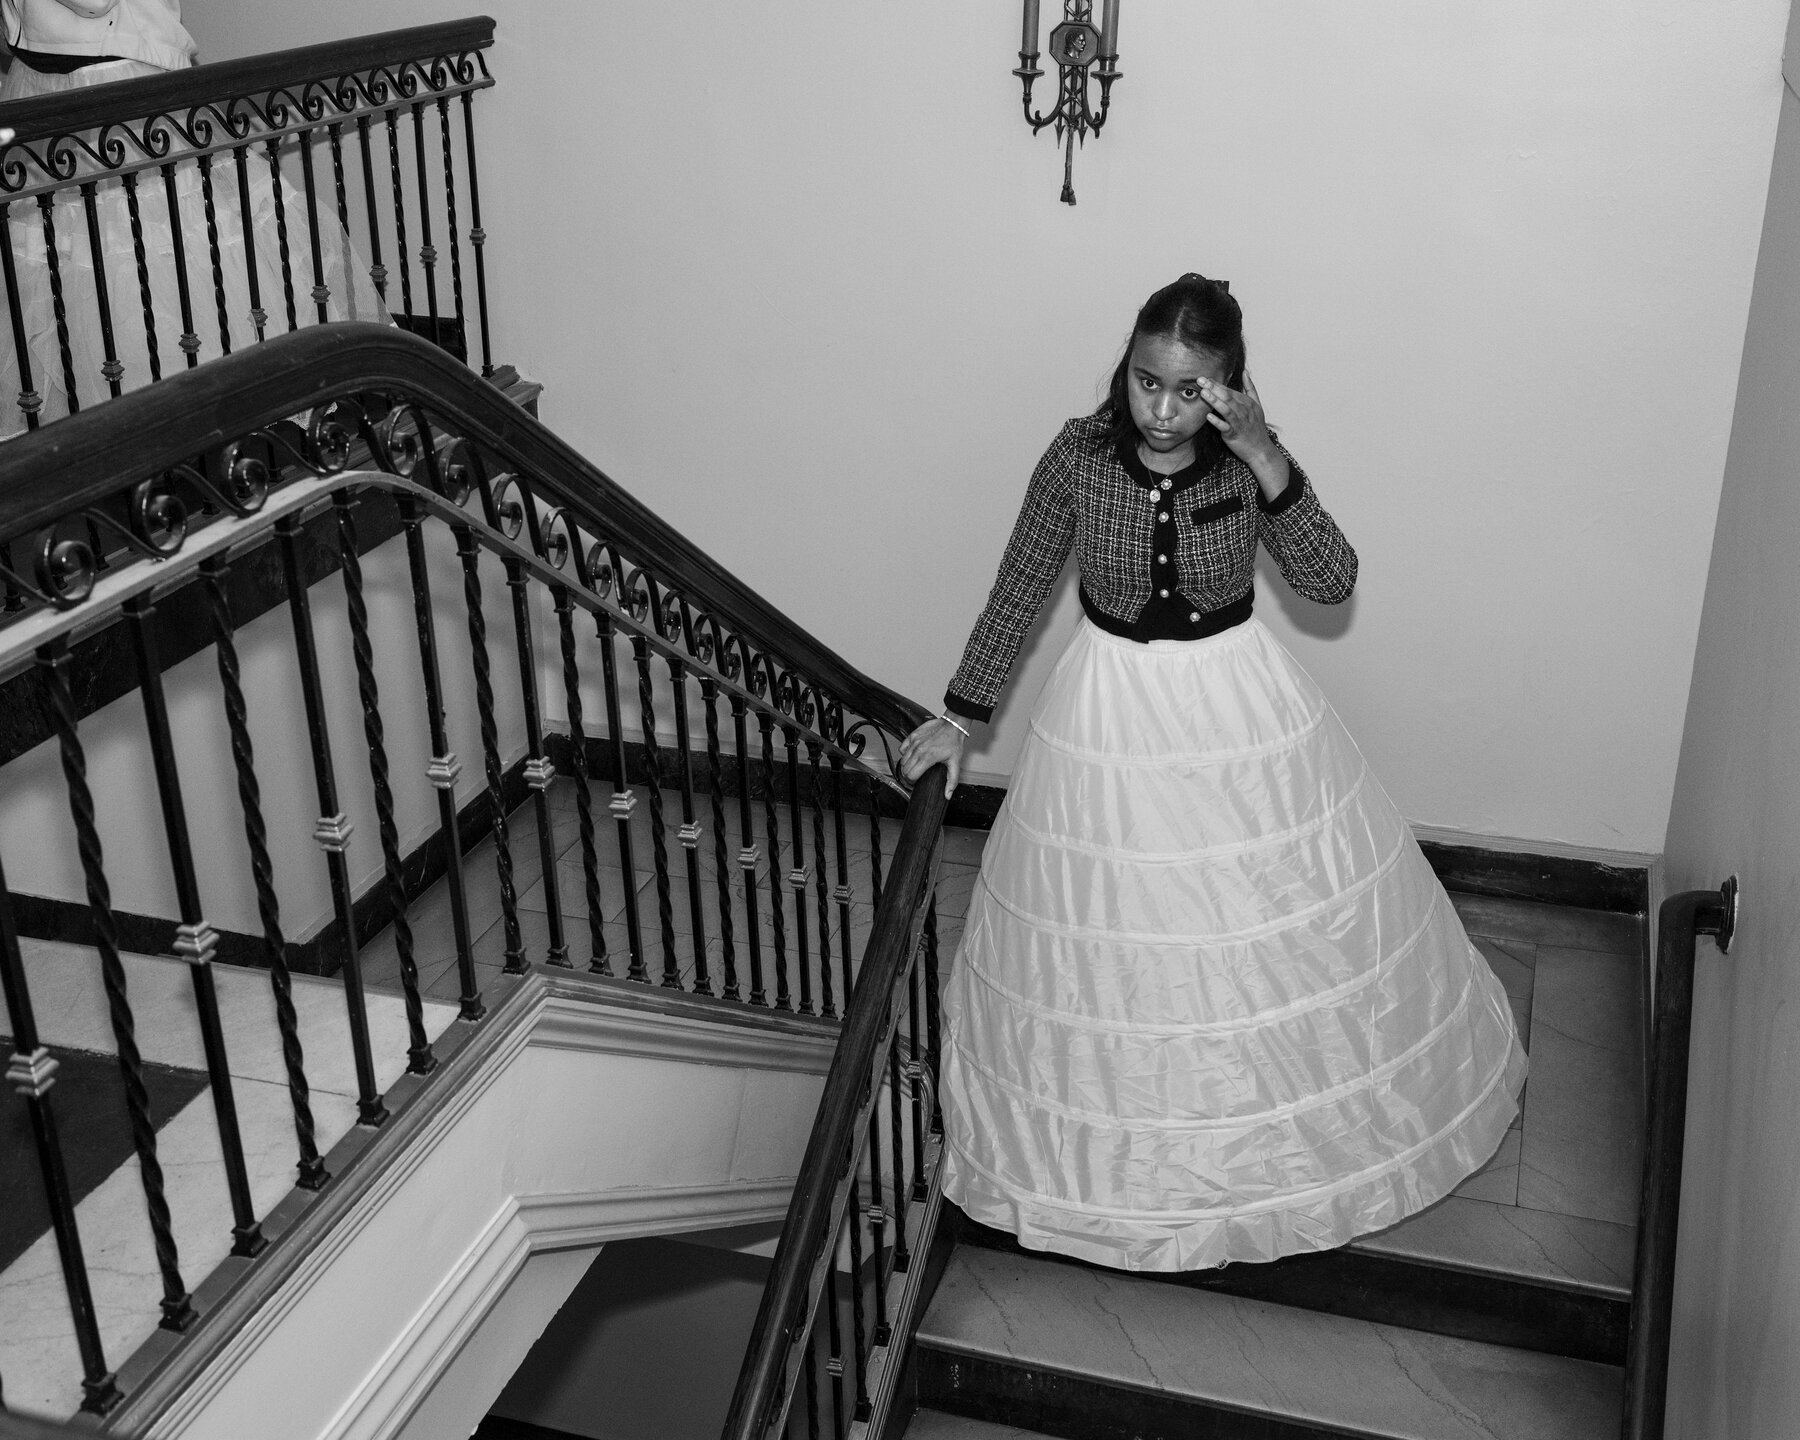 A young woman wearing a white hoop skirt and a plaid cardigan sweater with black trim standing halfway down a staircase with an ornate, black metal rail. She holds the bannister with her right hand and touches her eyebrow with her left.